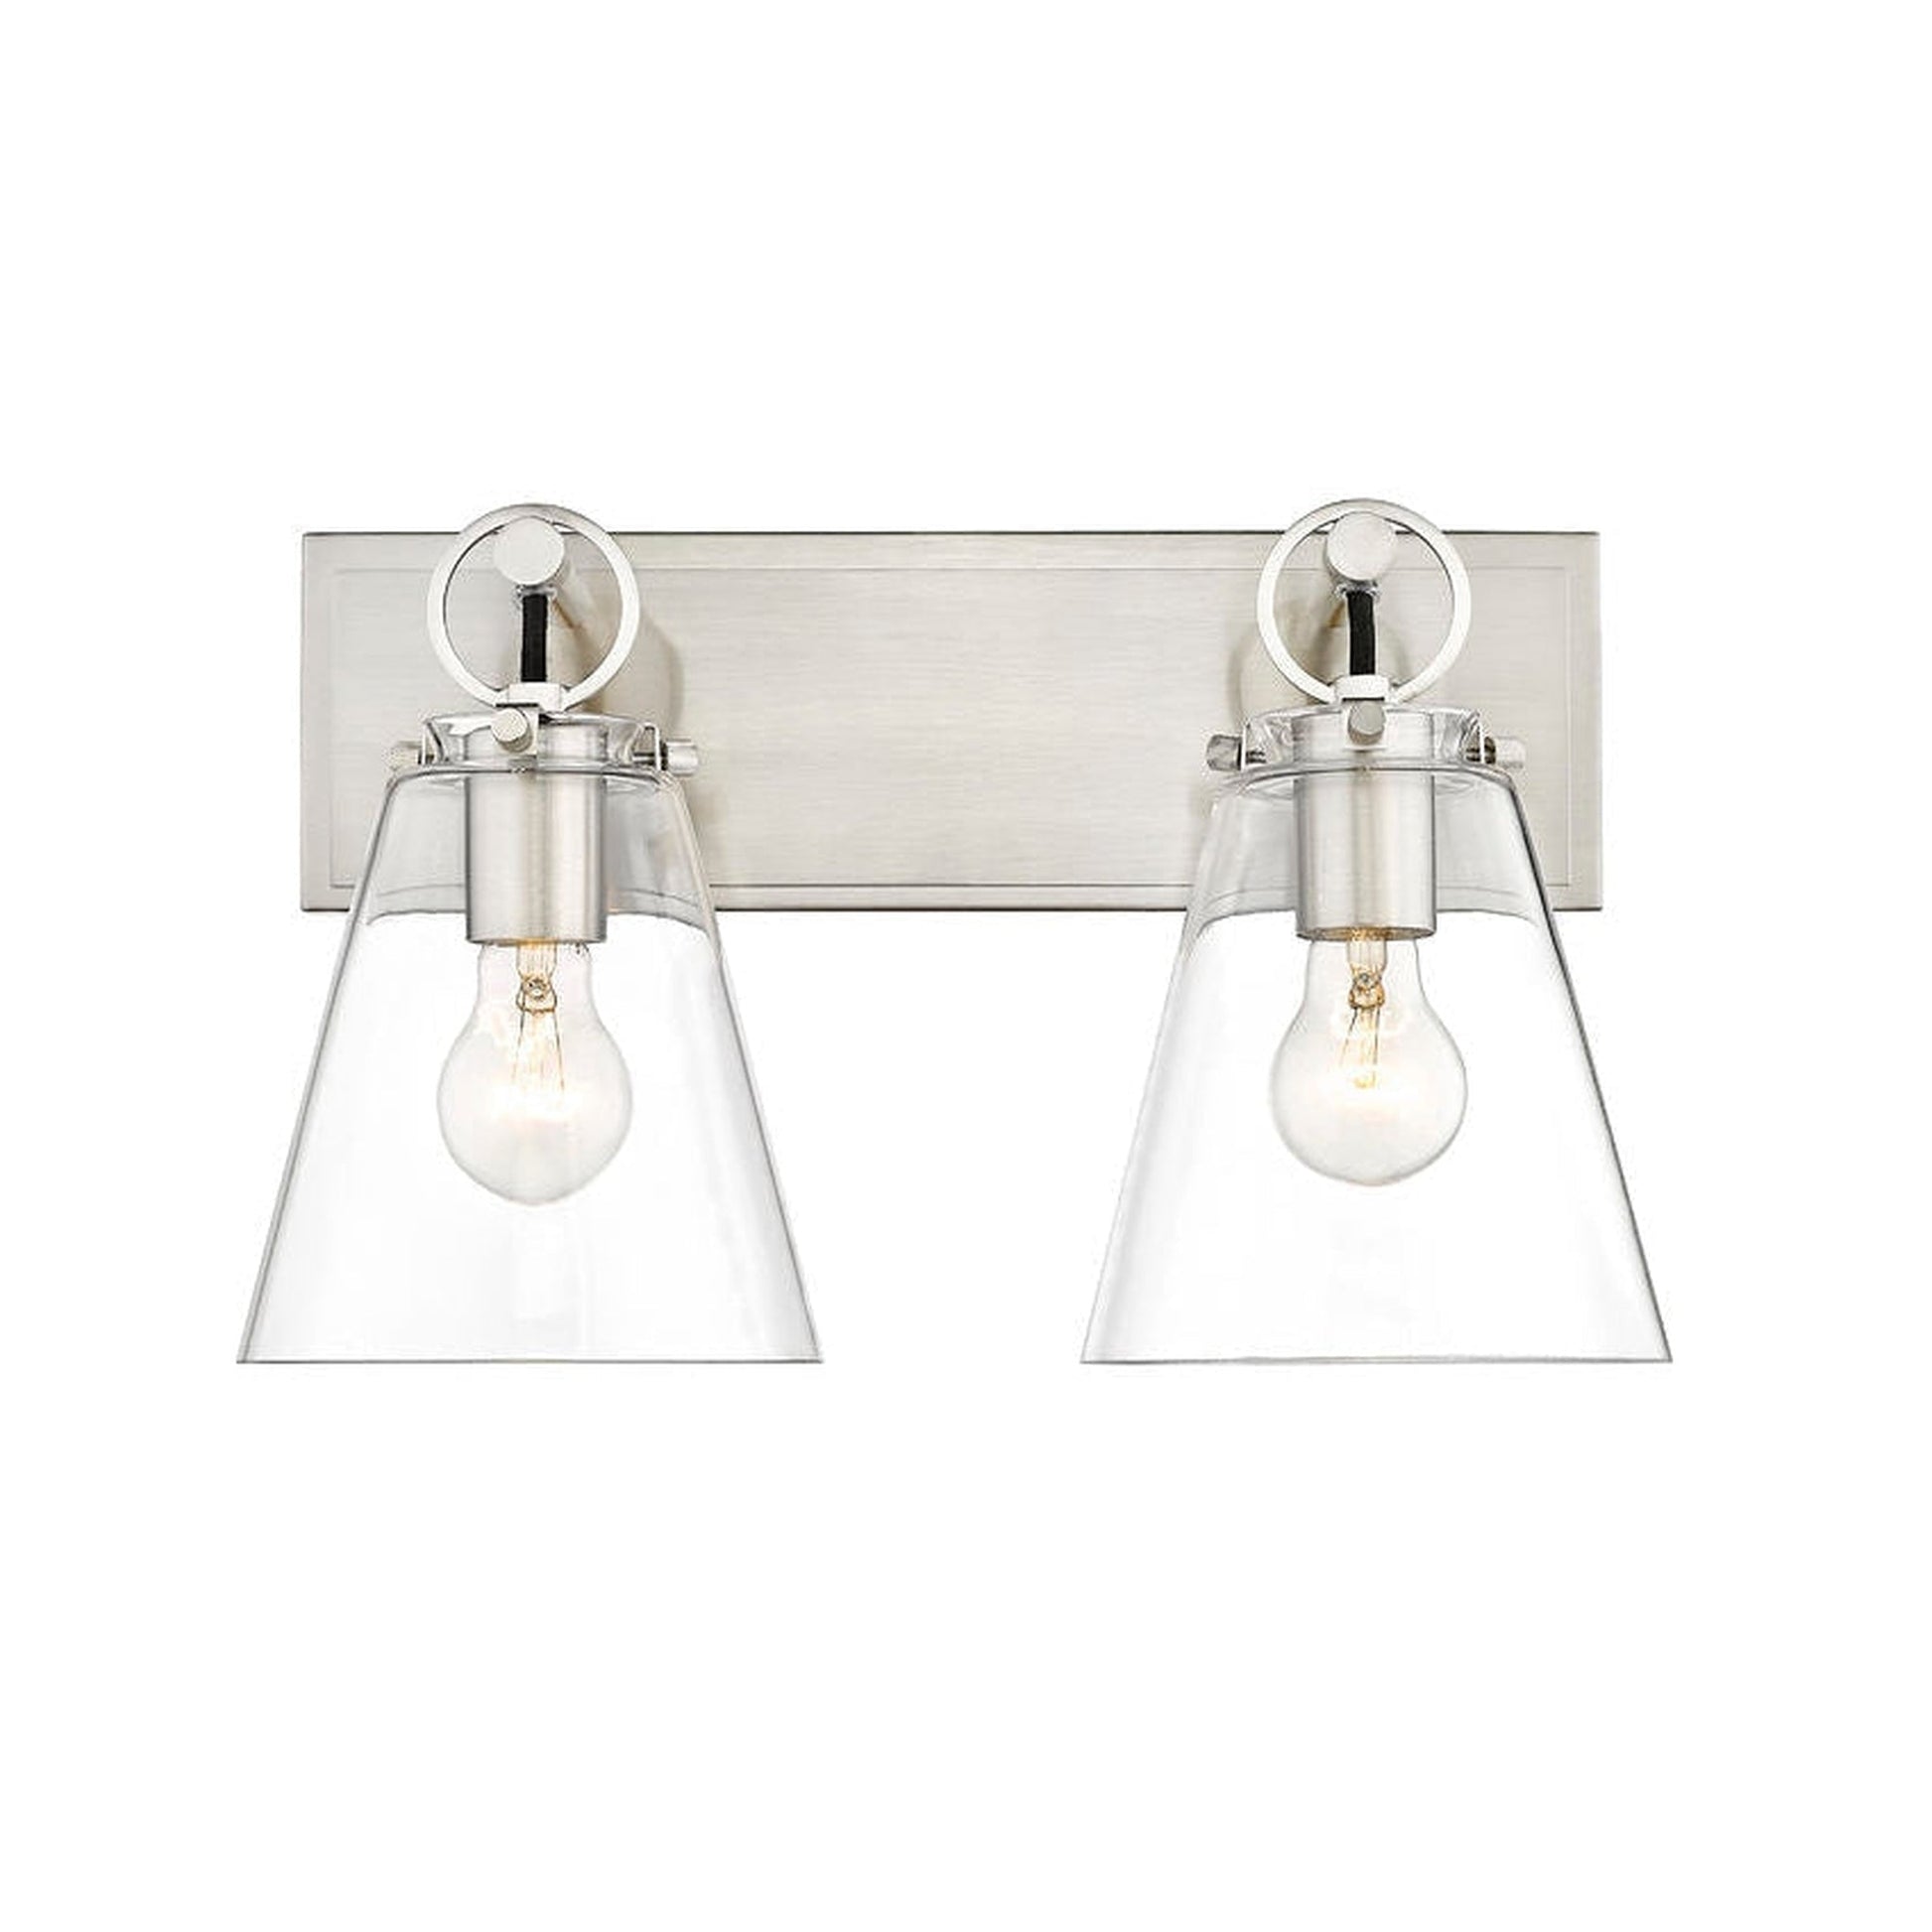 Z-Lite Harper 16" 2-Light Brushed Nickel Vanity Light With Clear Glass Shade